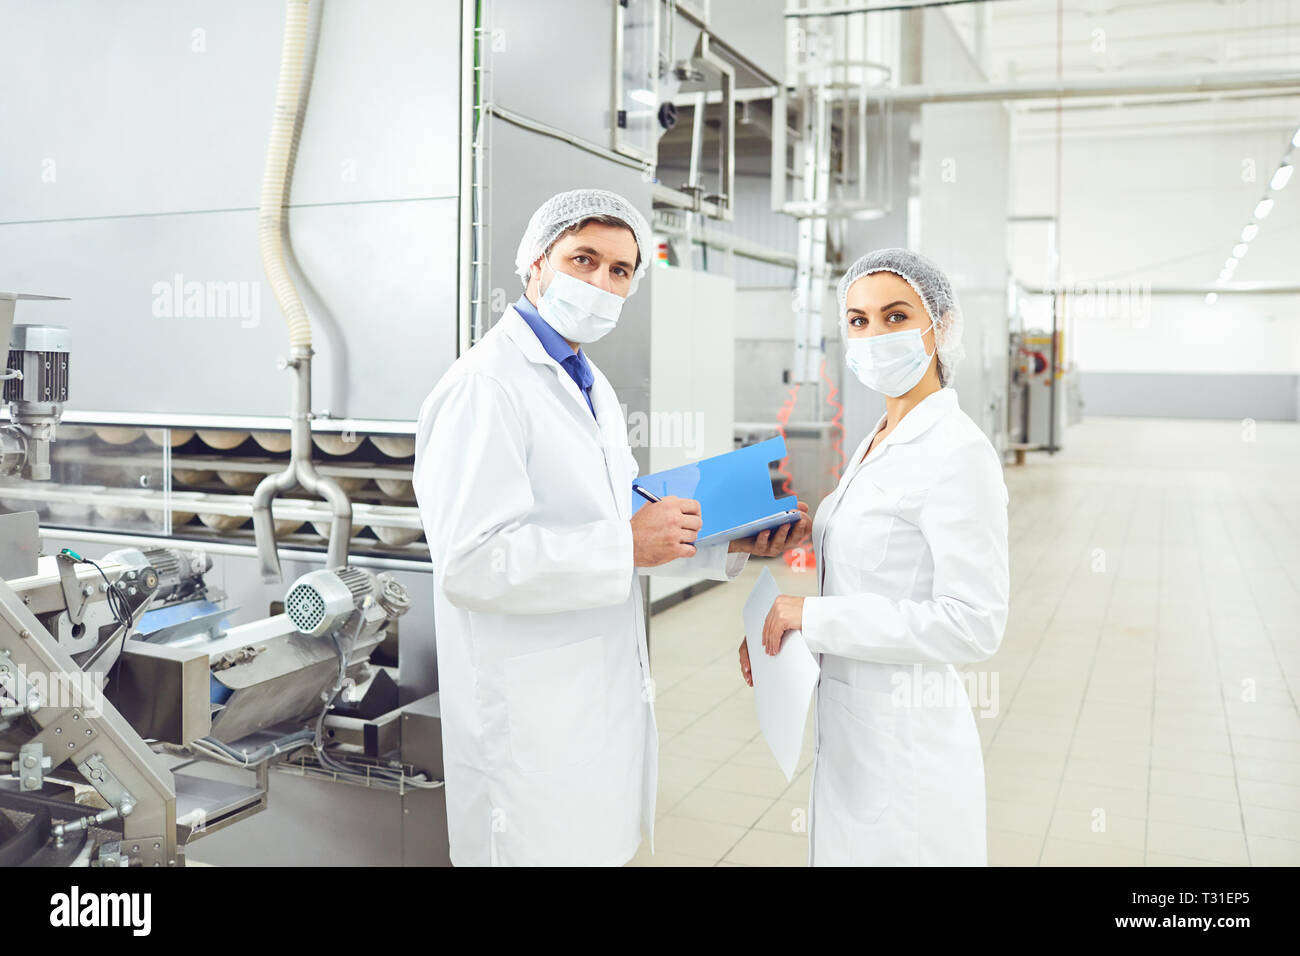 People technologists in masks at food factory. Stock Photo